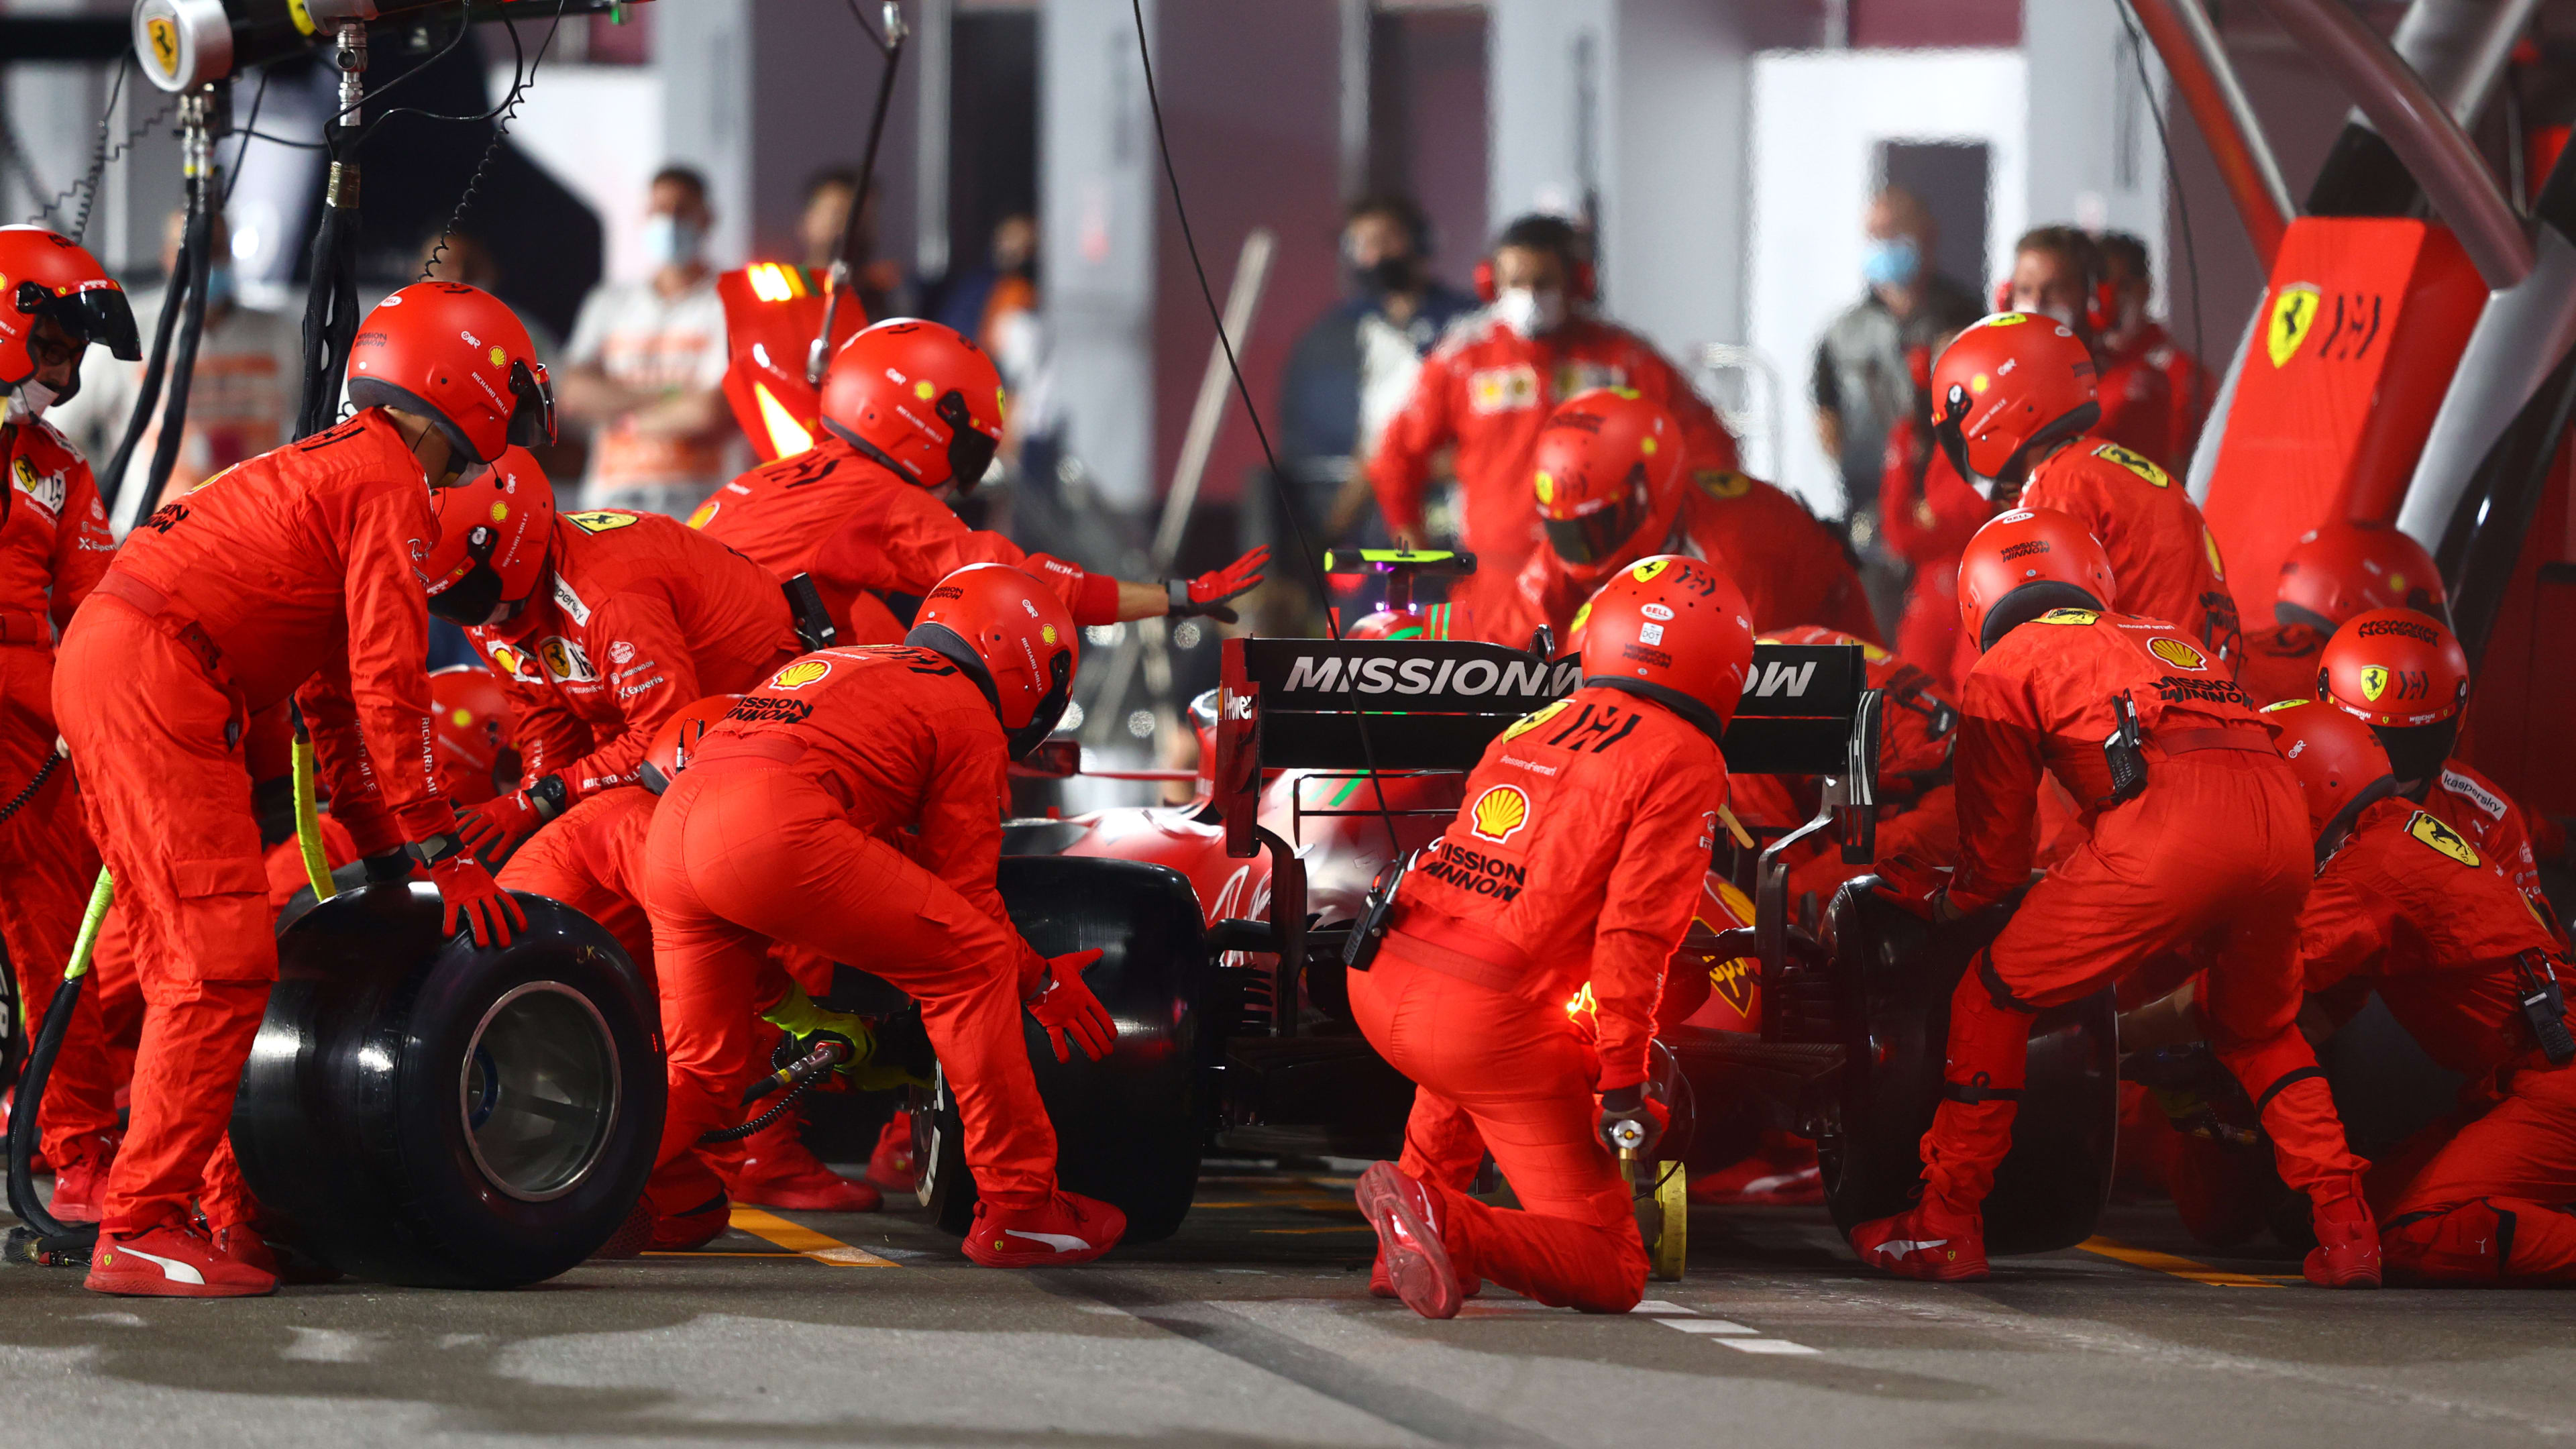 Relief for Ferrari who extend lead over McLaren, despite pit stop issues for Sainz and chassis problems for Leclerc